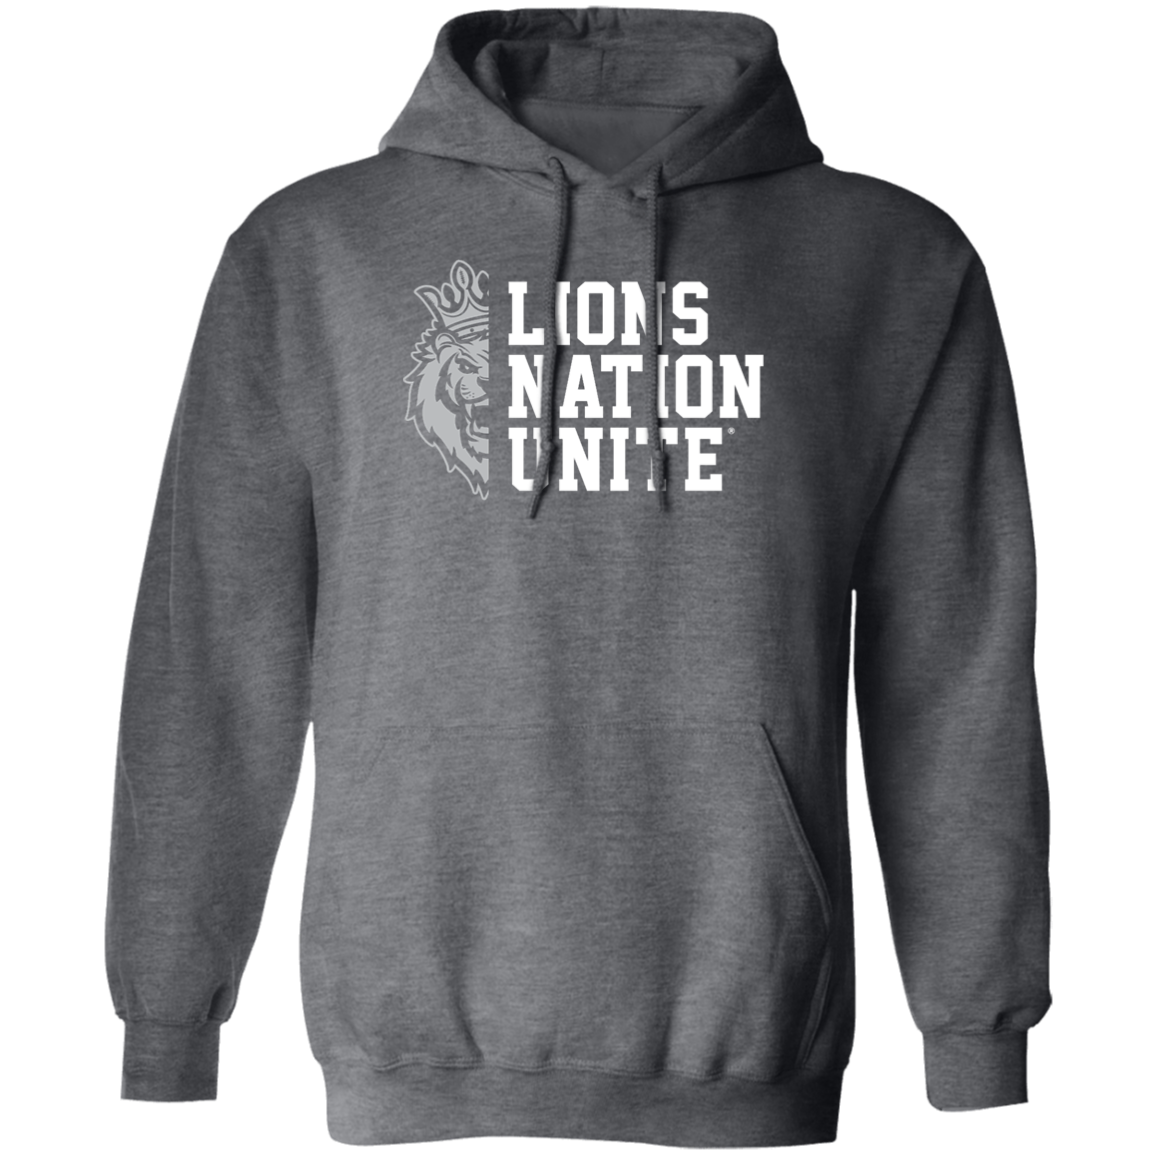 Lions Nation Unite - G185 Pullover Hoodie